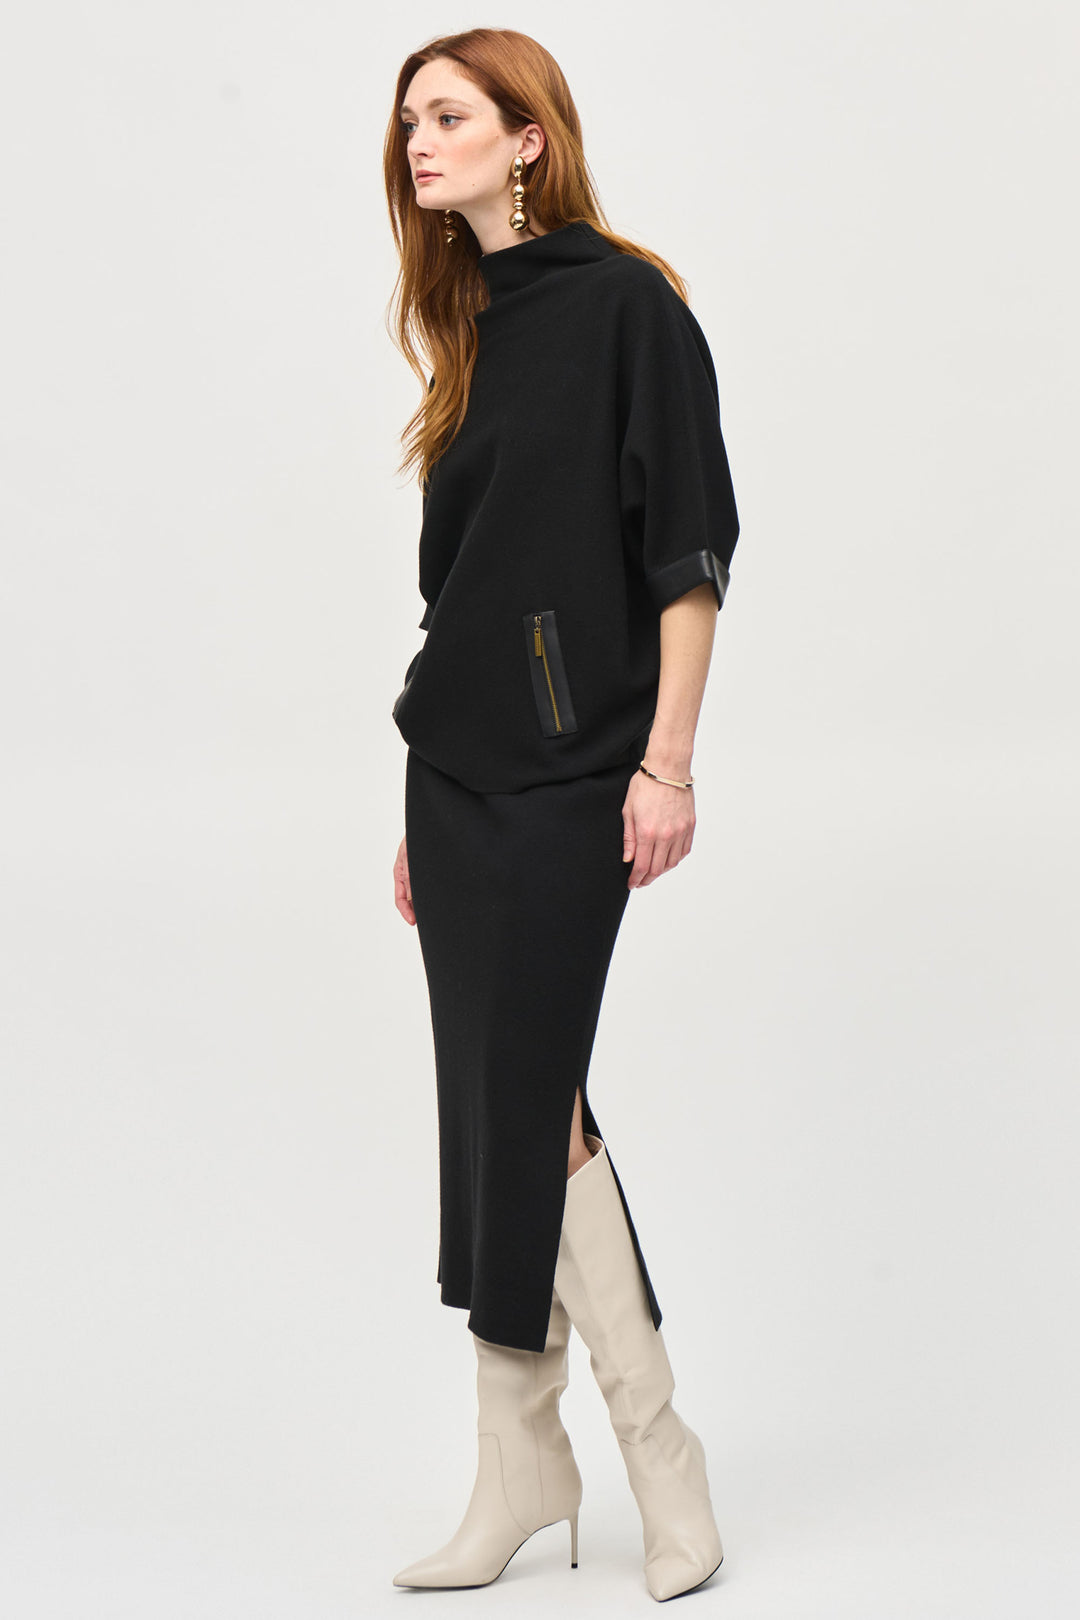 Joseph Ribkoff Fall 2024  The knit fabric offers a comfortable fit, while the elastic waistband ensures a perfect fit. The side slit adds a touch of flair to this classic skirt. 